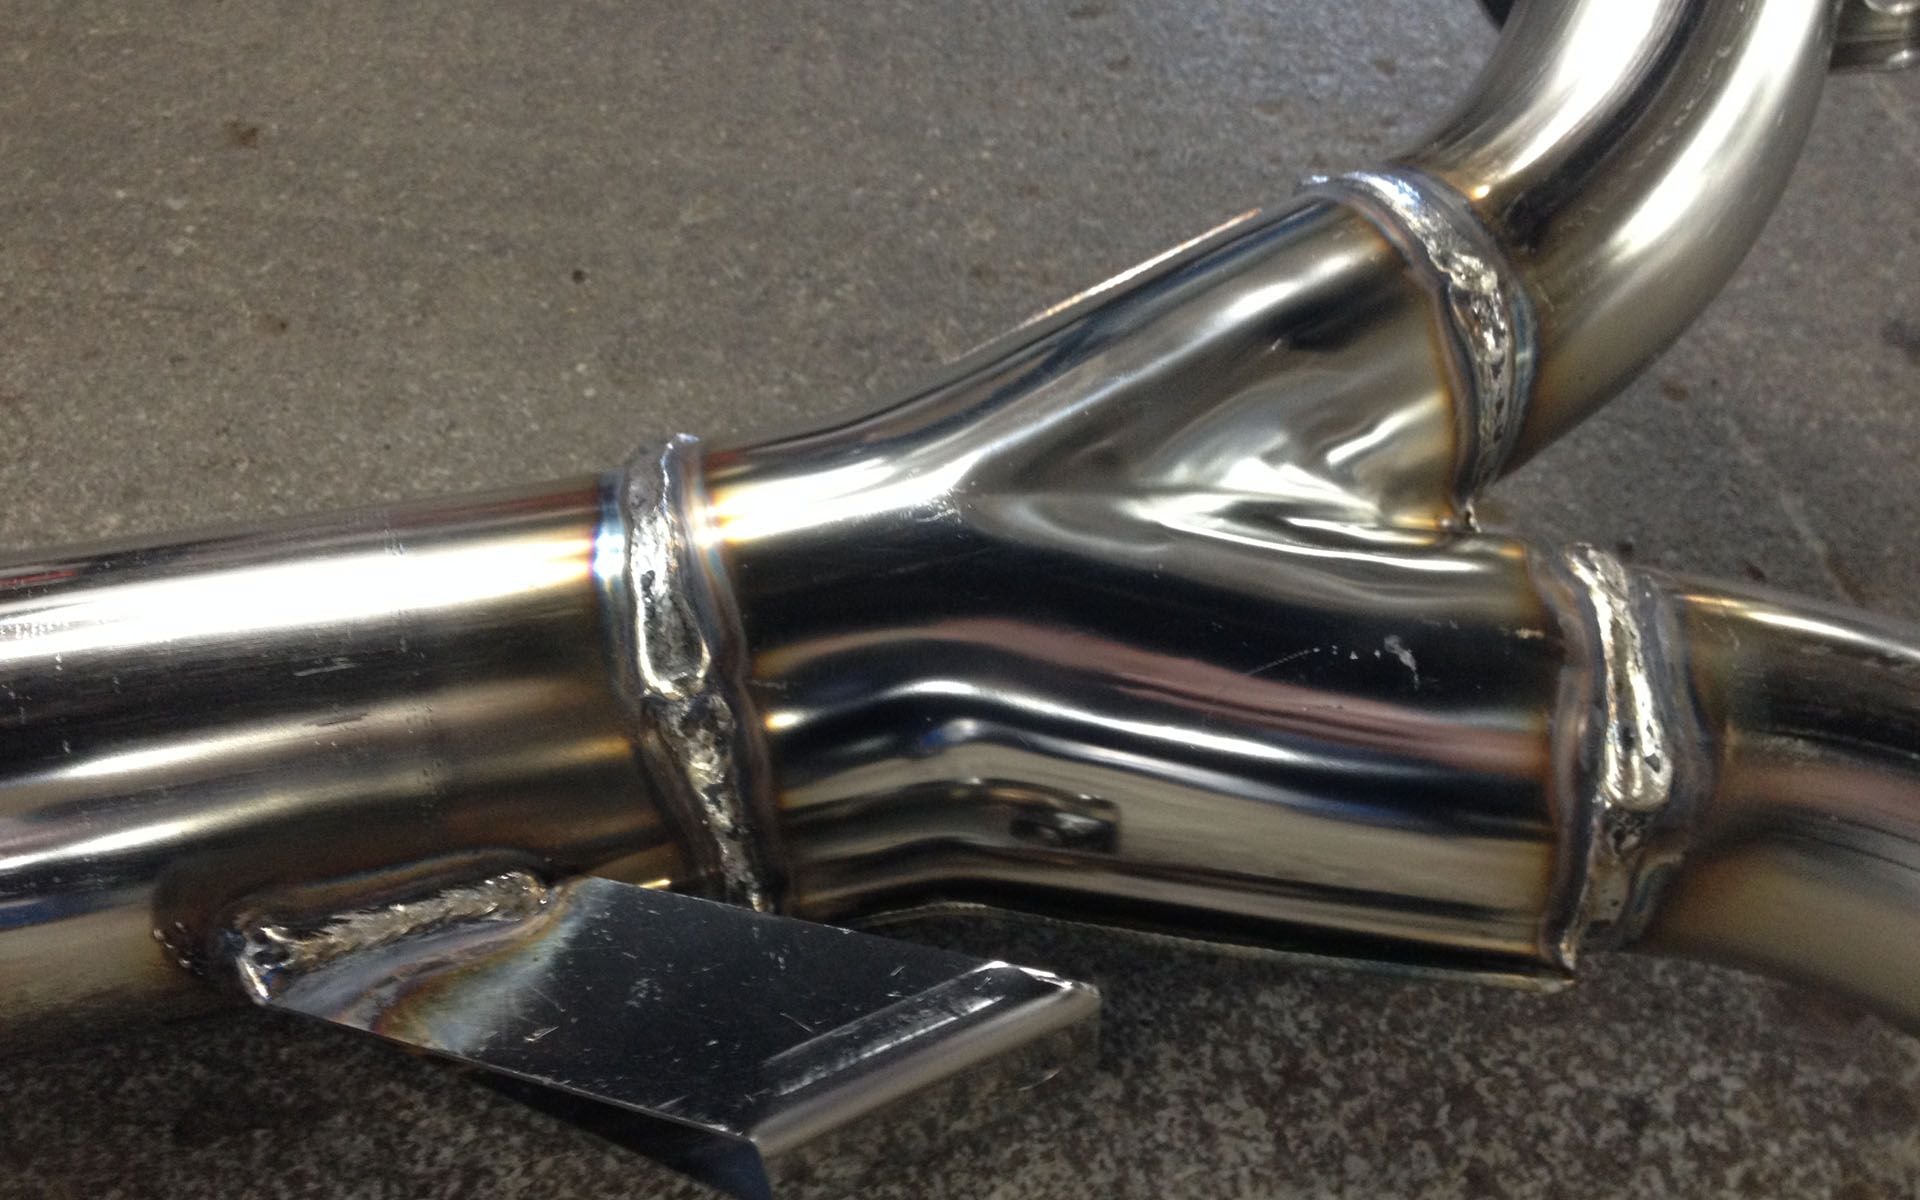 HKS has discontinued Super Turbo exhaust for Evo X - EvolutionM